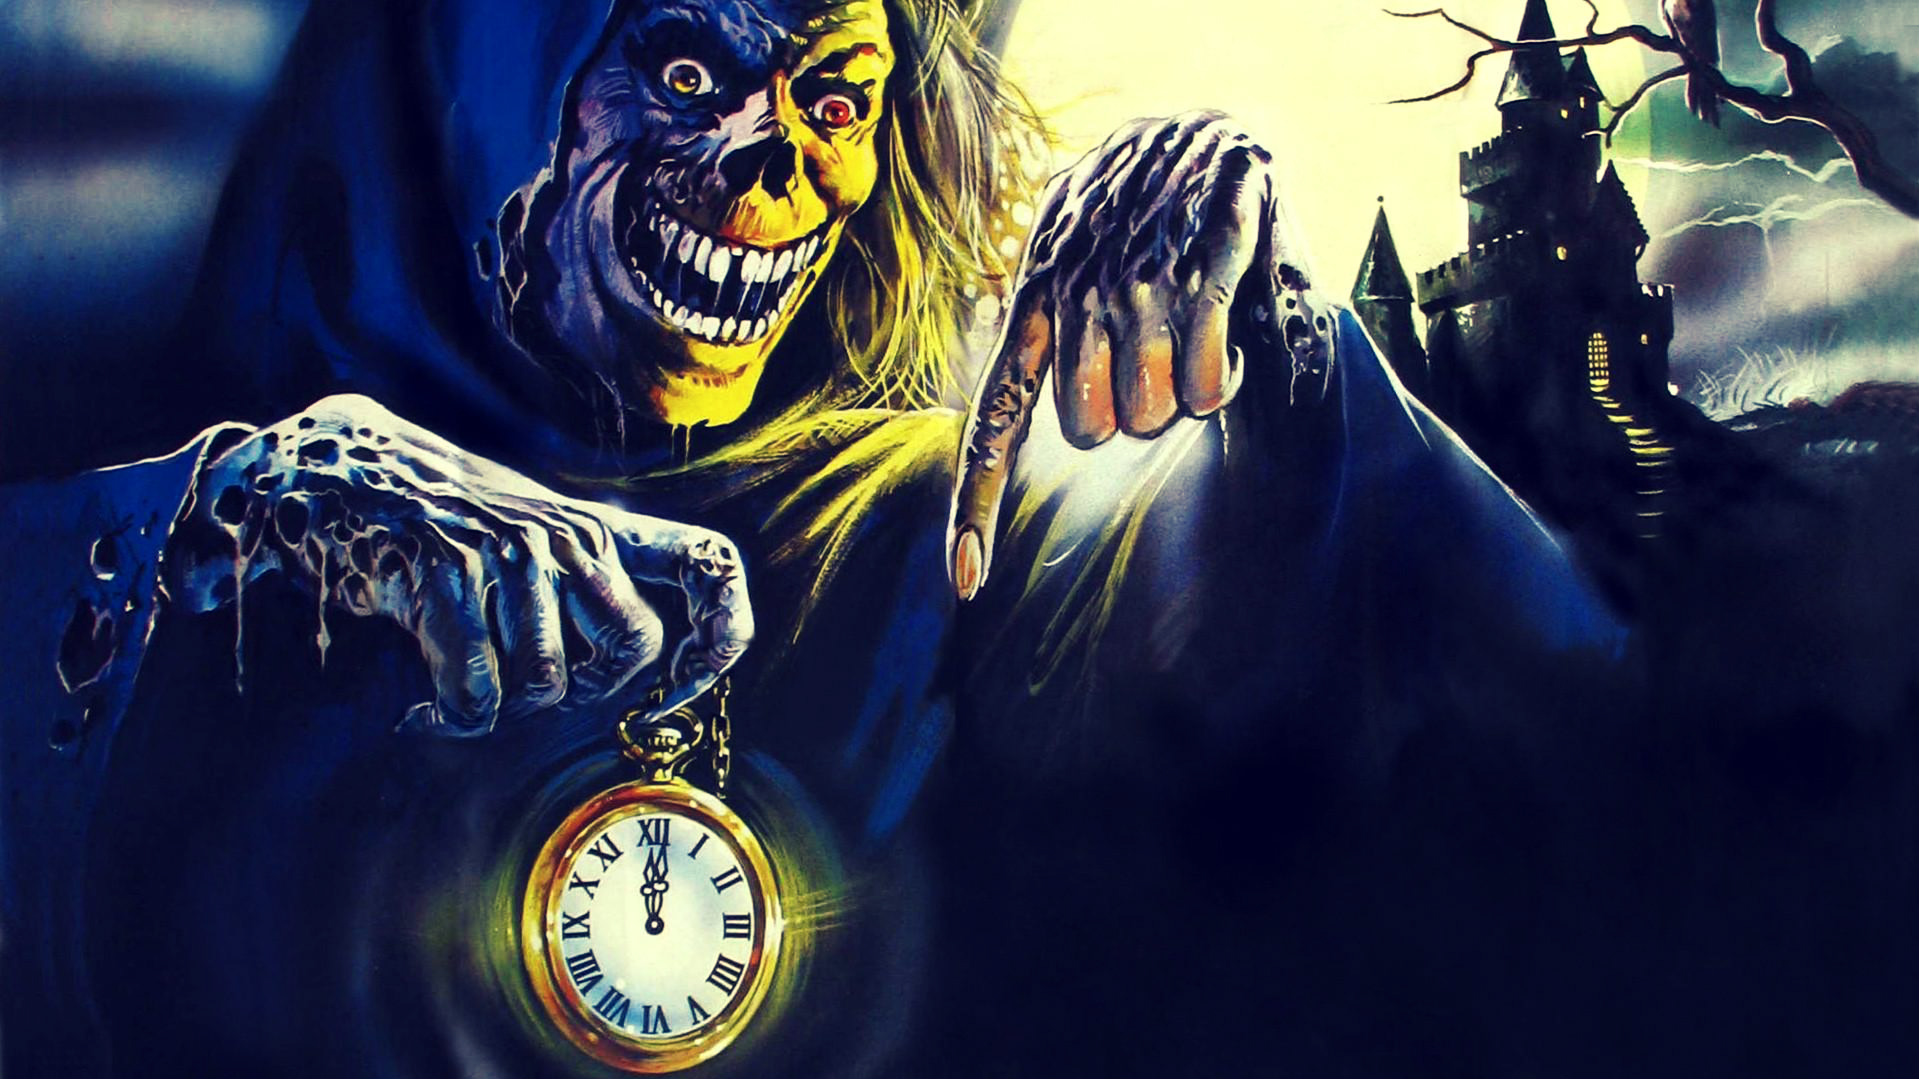 4 Creepshow 2 HD Wallpapers | Backgrounds - Wallpaper Abyss